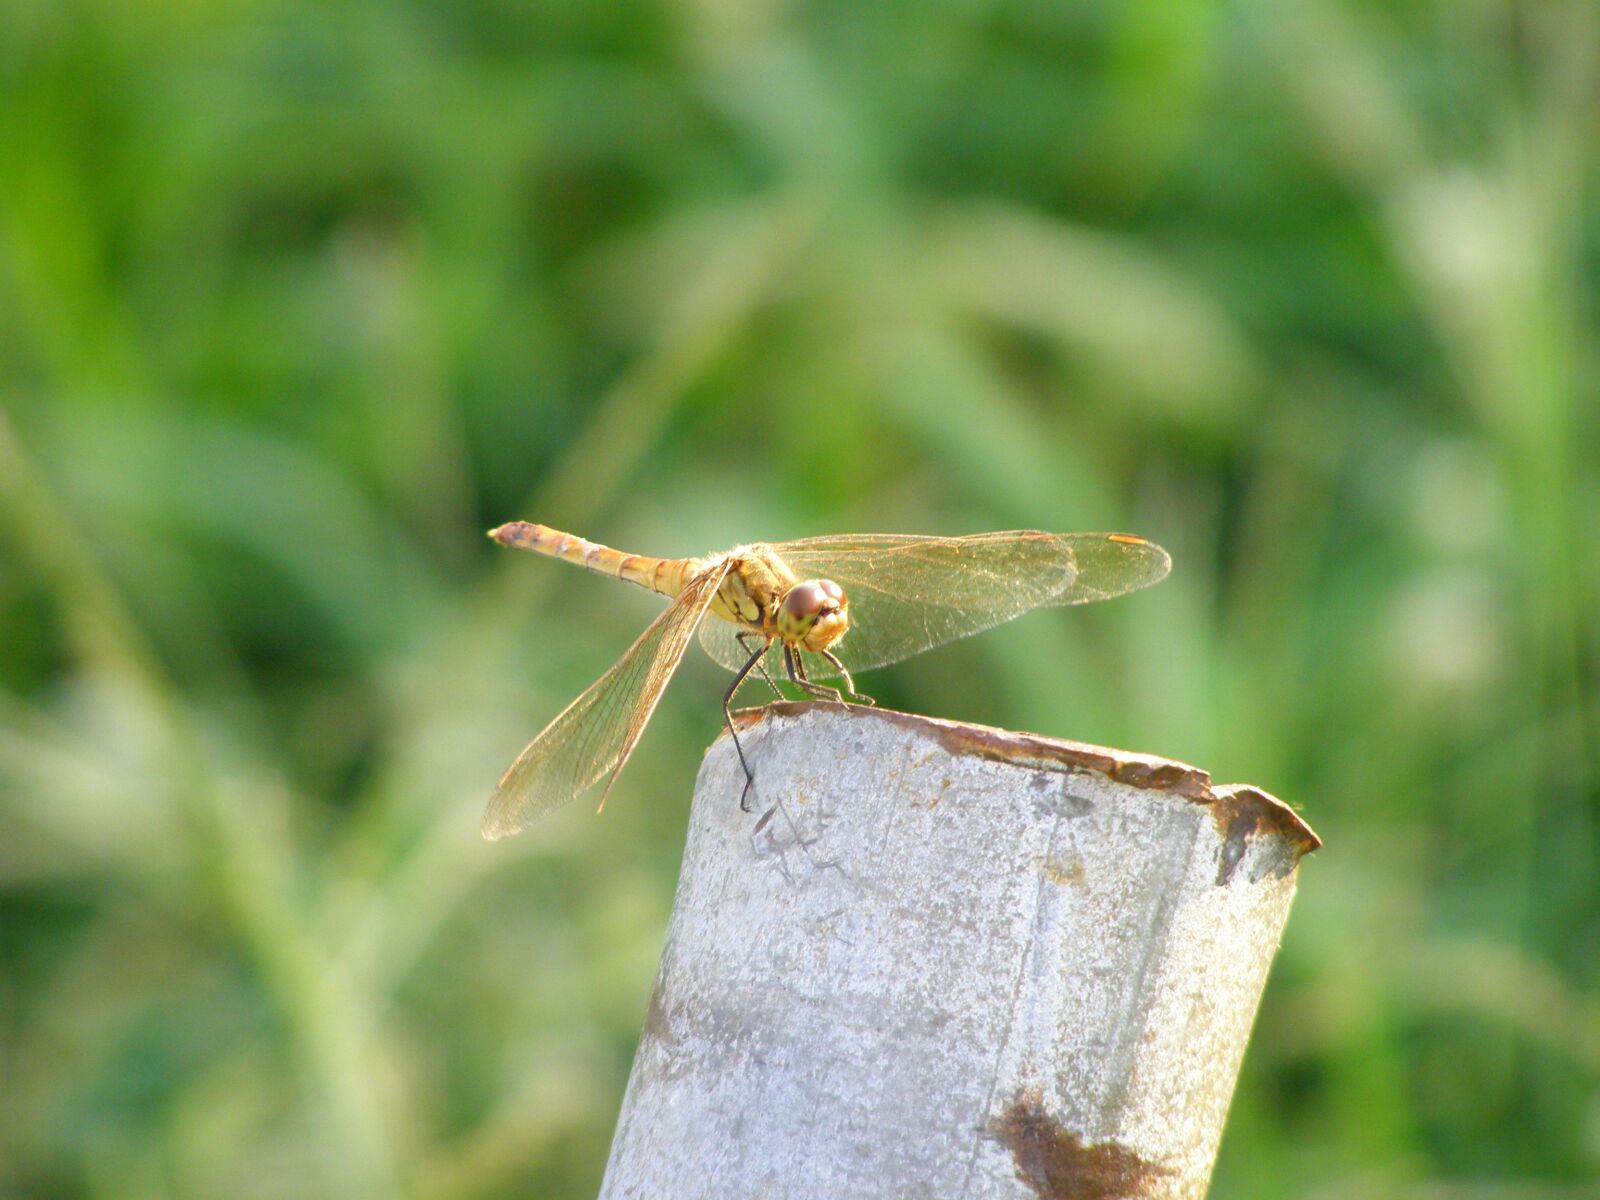 Olympus SP510UZ sample photo. Dragonfly, nature, insects photography